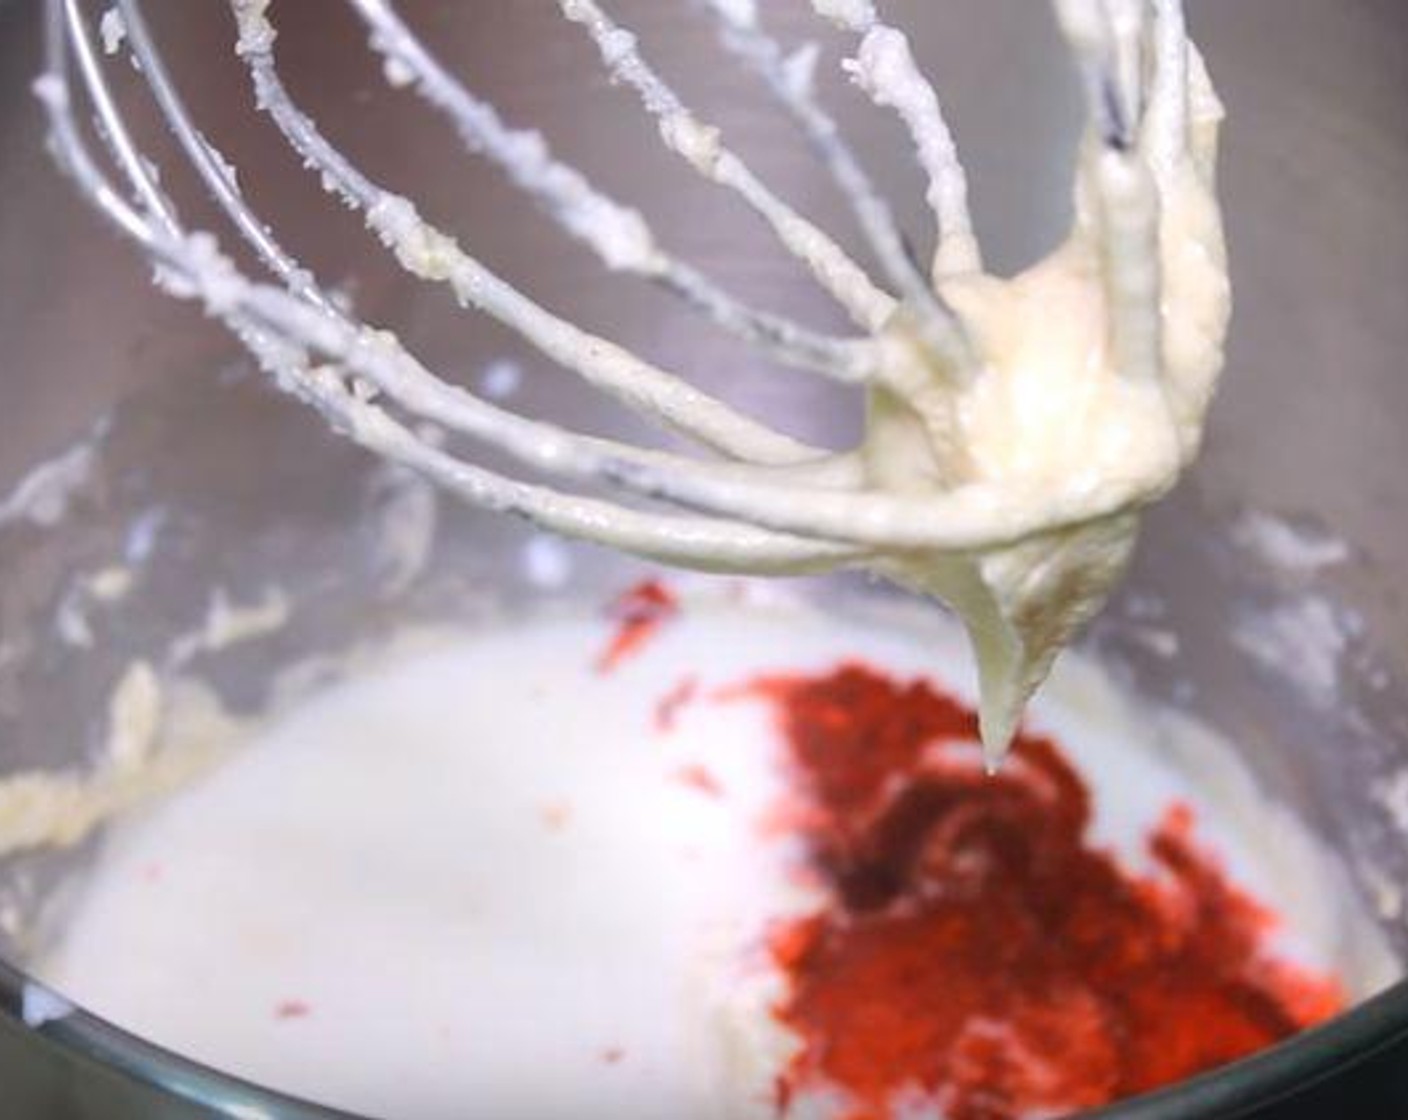 step 2 Add the Buttermilk (3/4 cup) and Red Food Coloring (2 Tbsp). Blend again.